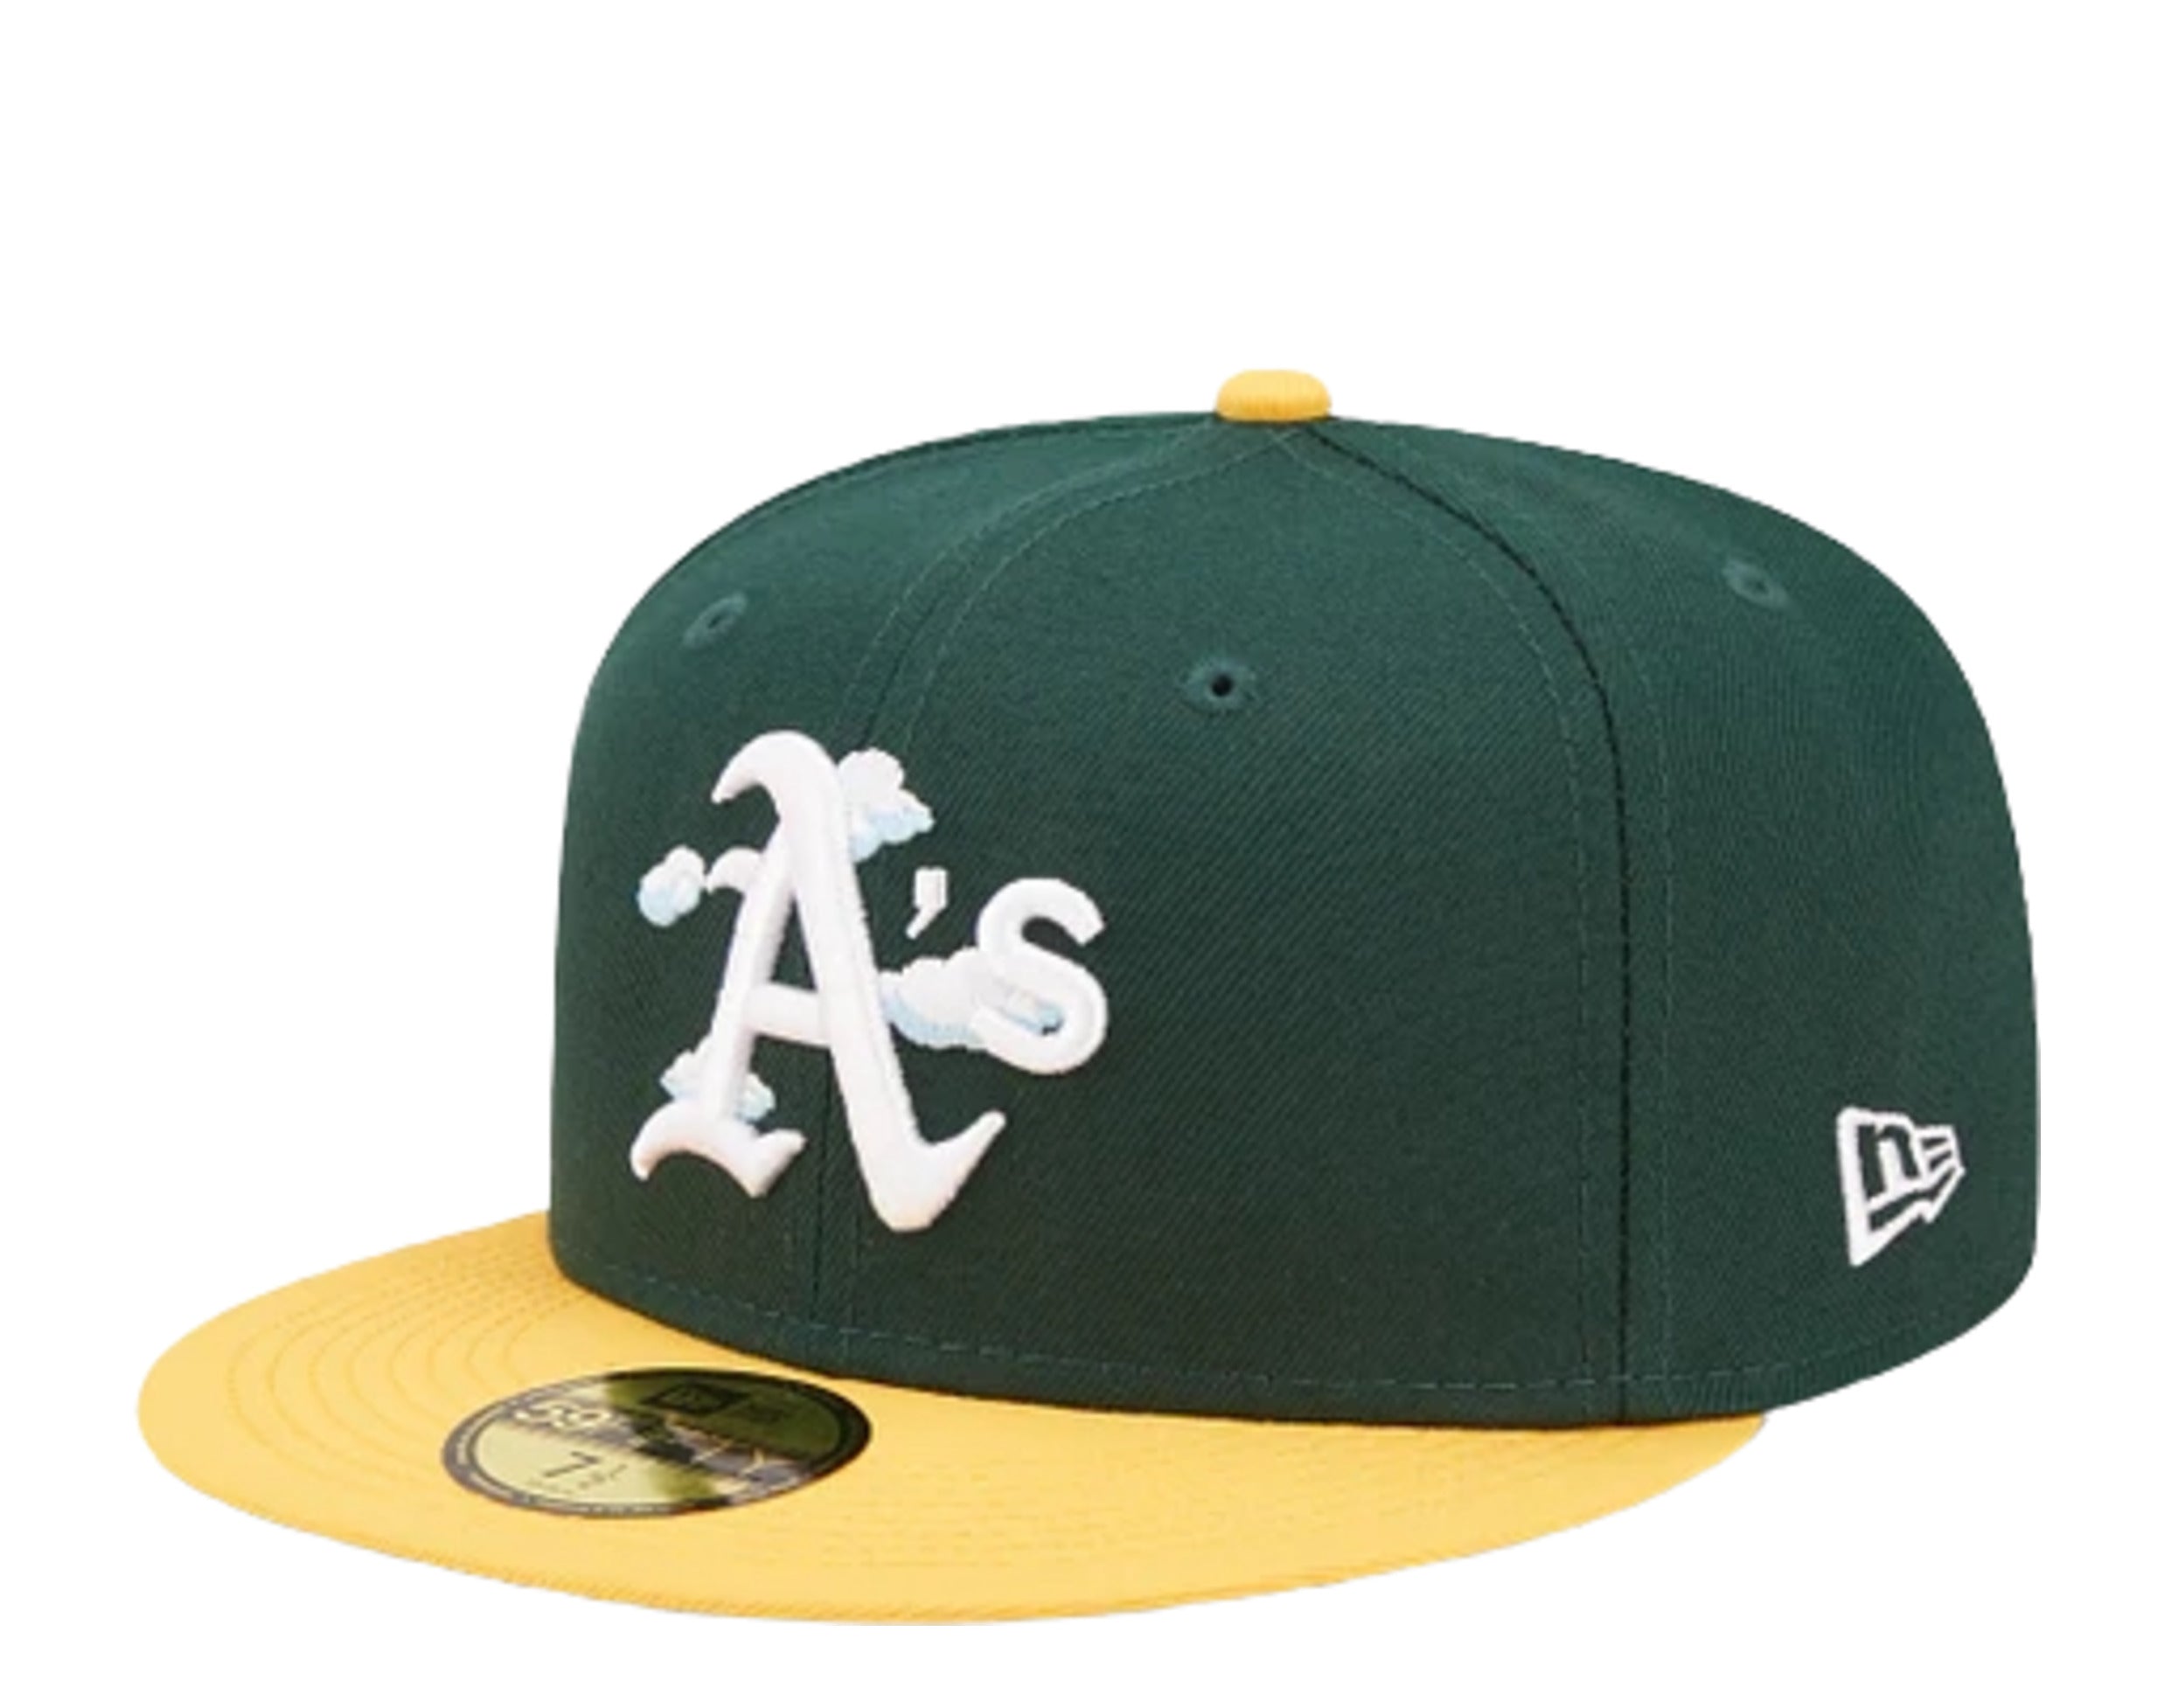 Infant Oakland Athletics New Era Green My First 9FIFTY Hat